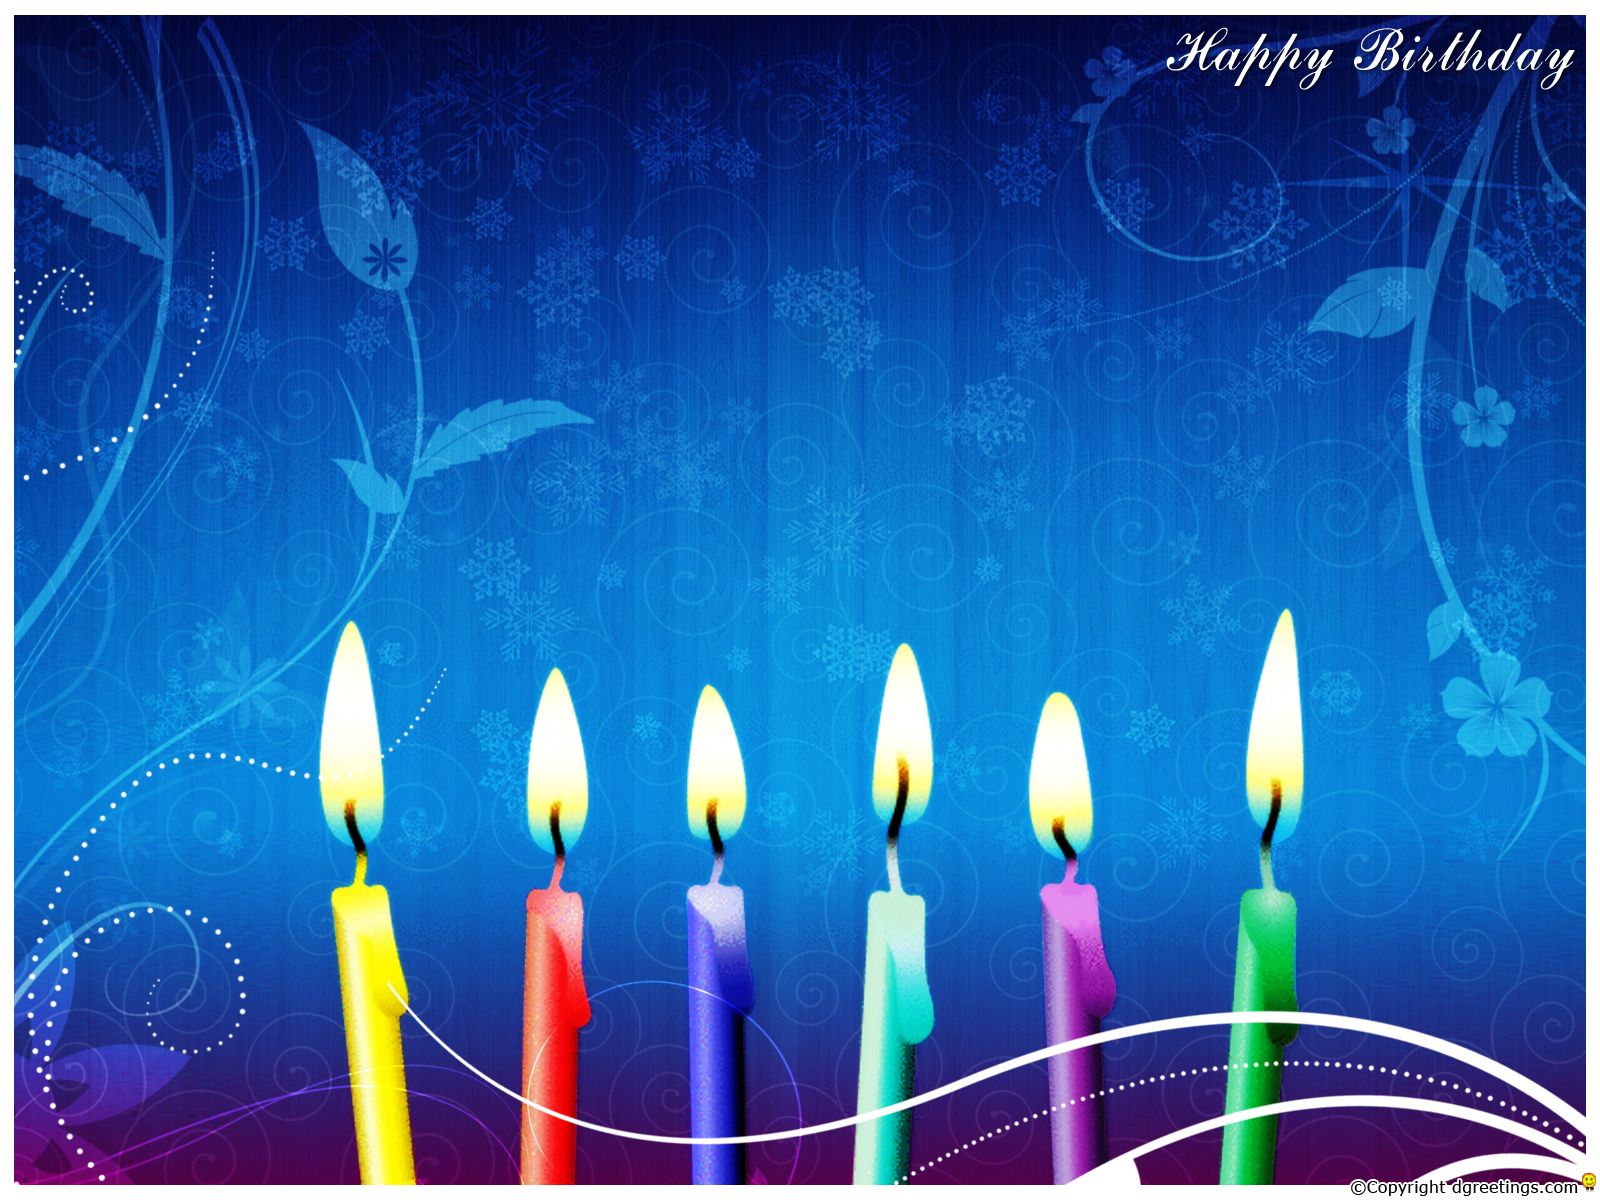 A picture of four candles on top - Birthday